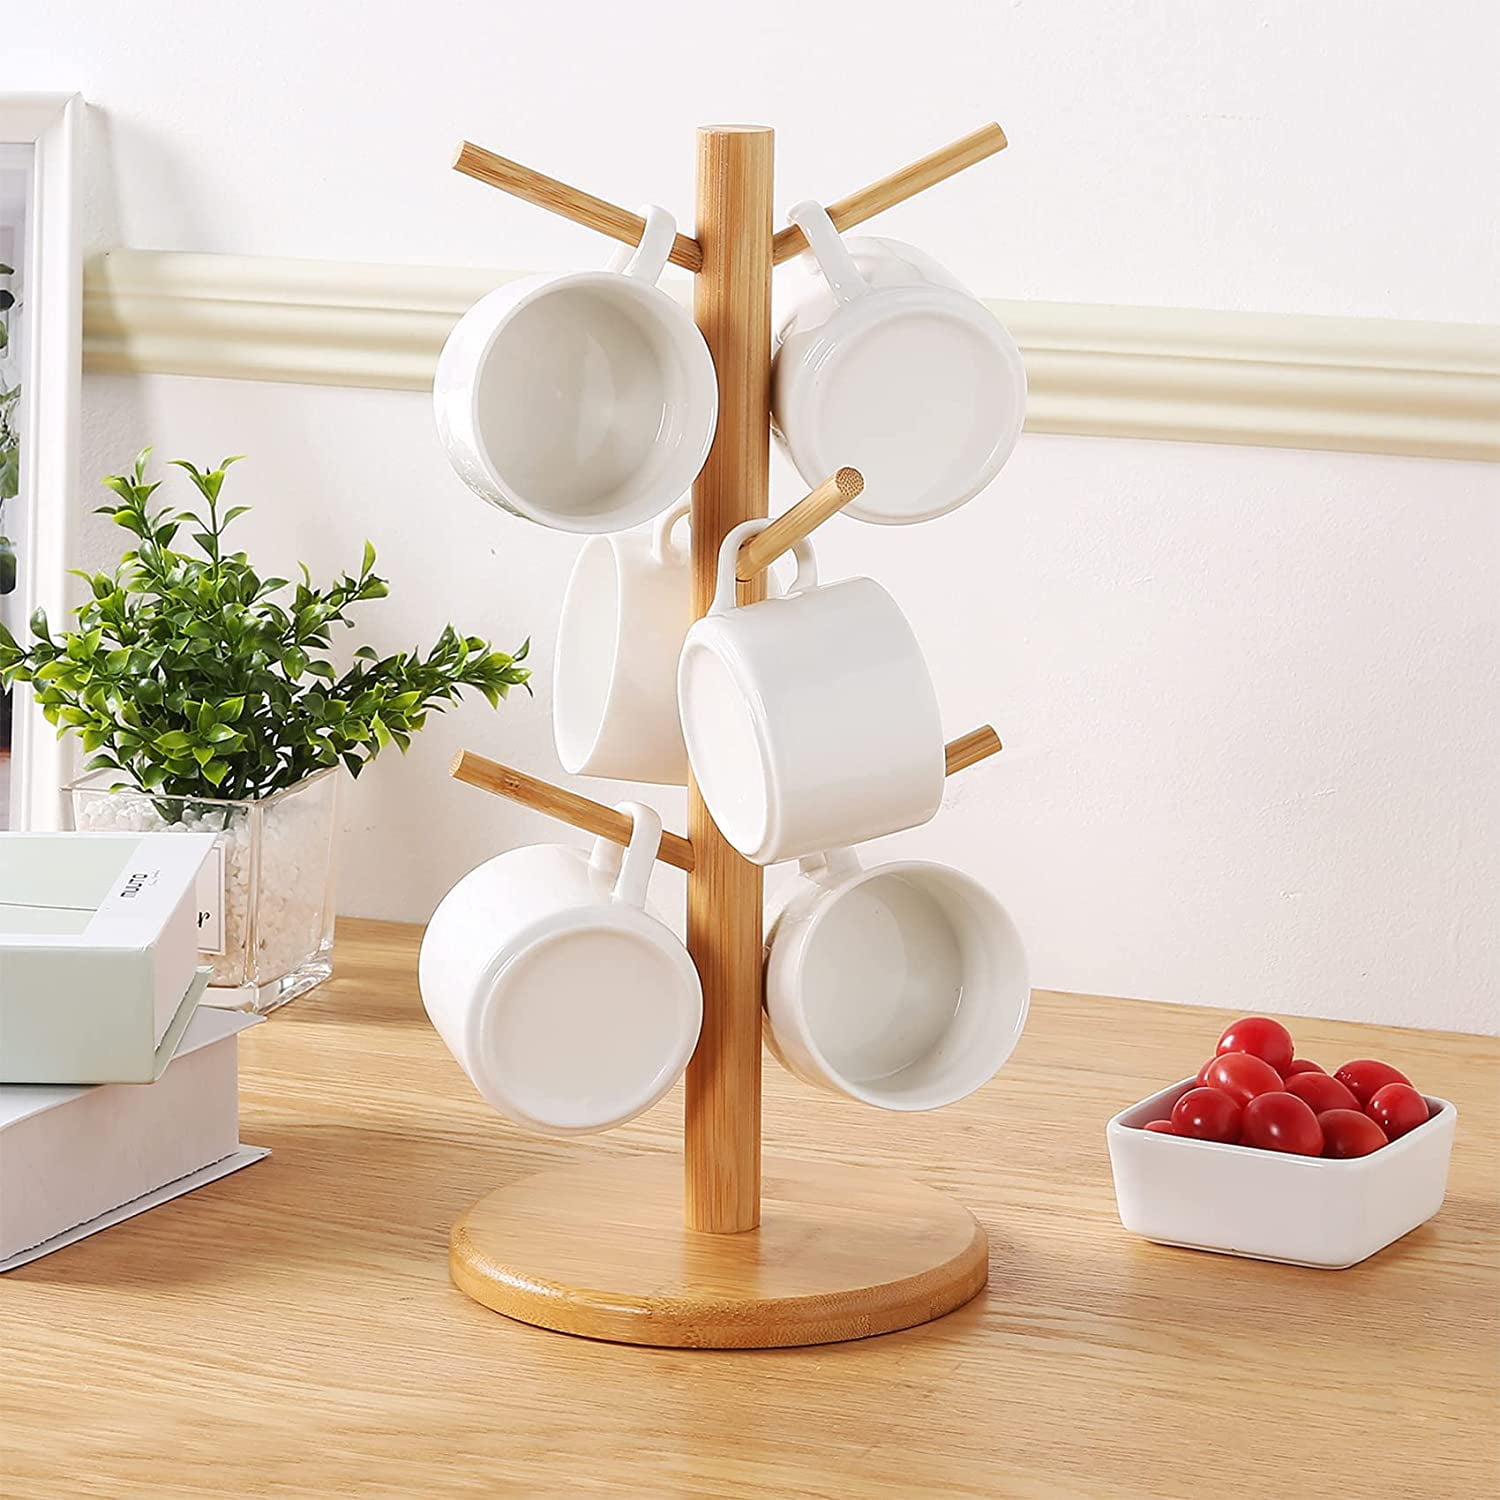 Wisuce Bamboo Mug Holder Tree, Thicker Base Coffee Cup Holder Stand for Counter, Mug Rack with 6 Hooks